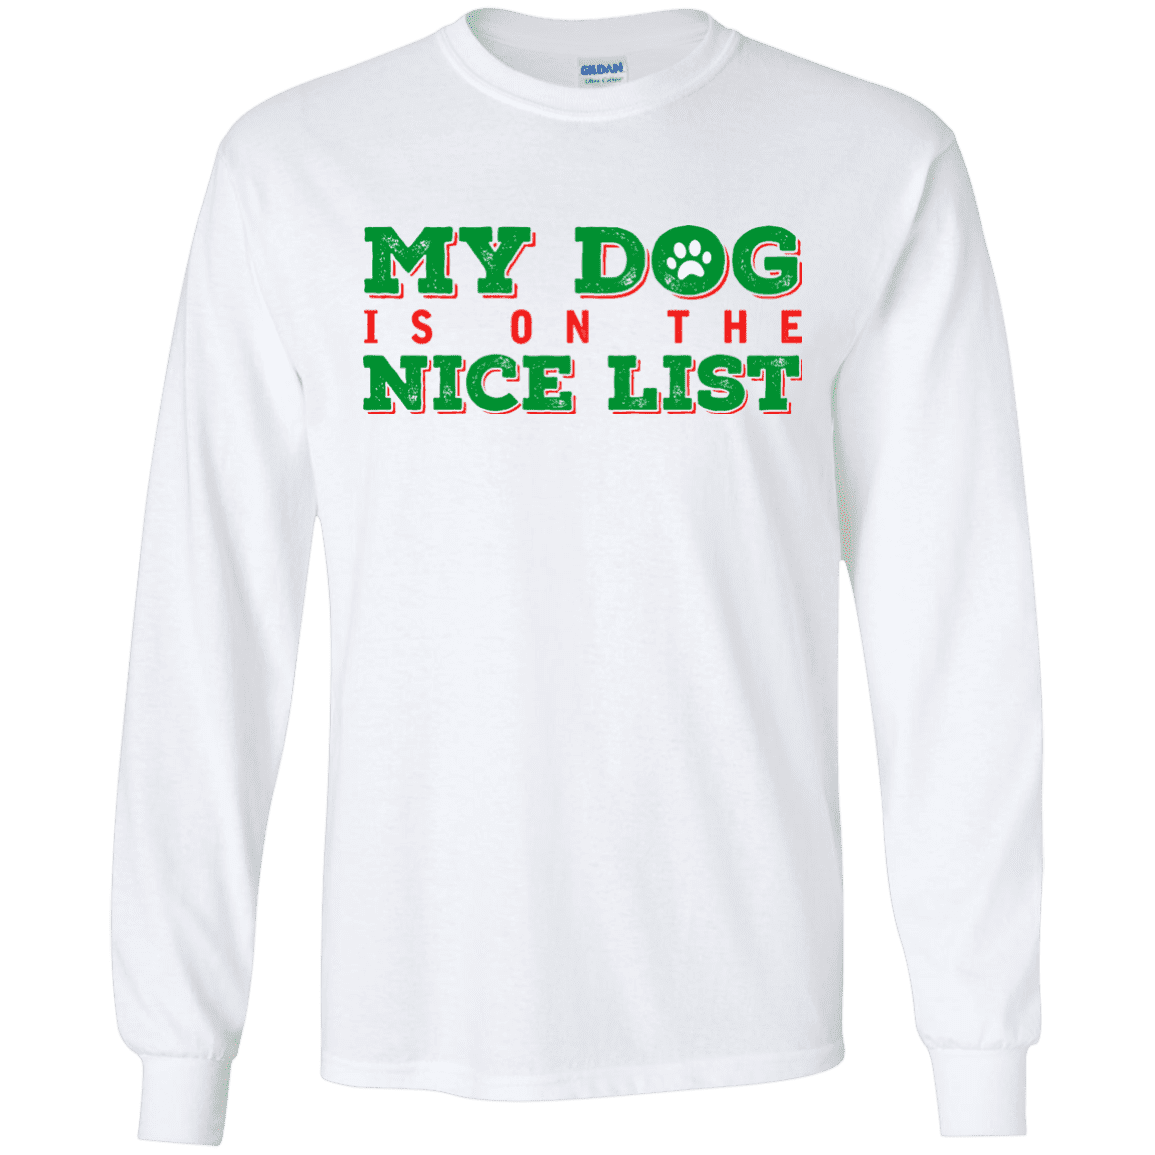 My Dog Is On The Nice List - White Long Sleeve T Shirt.